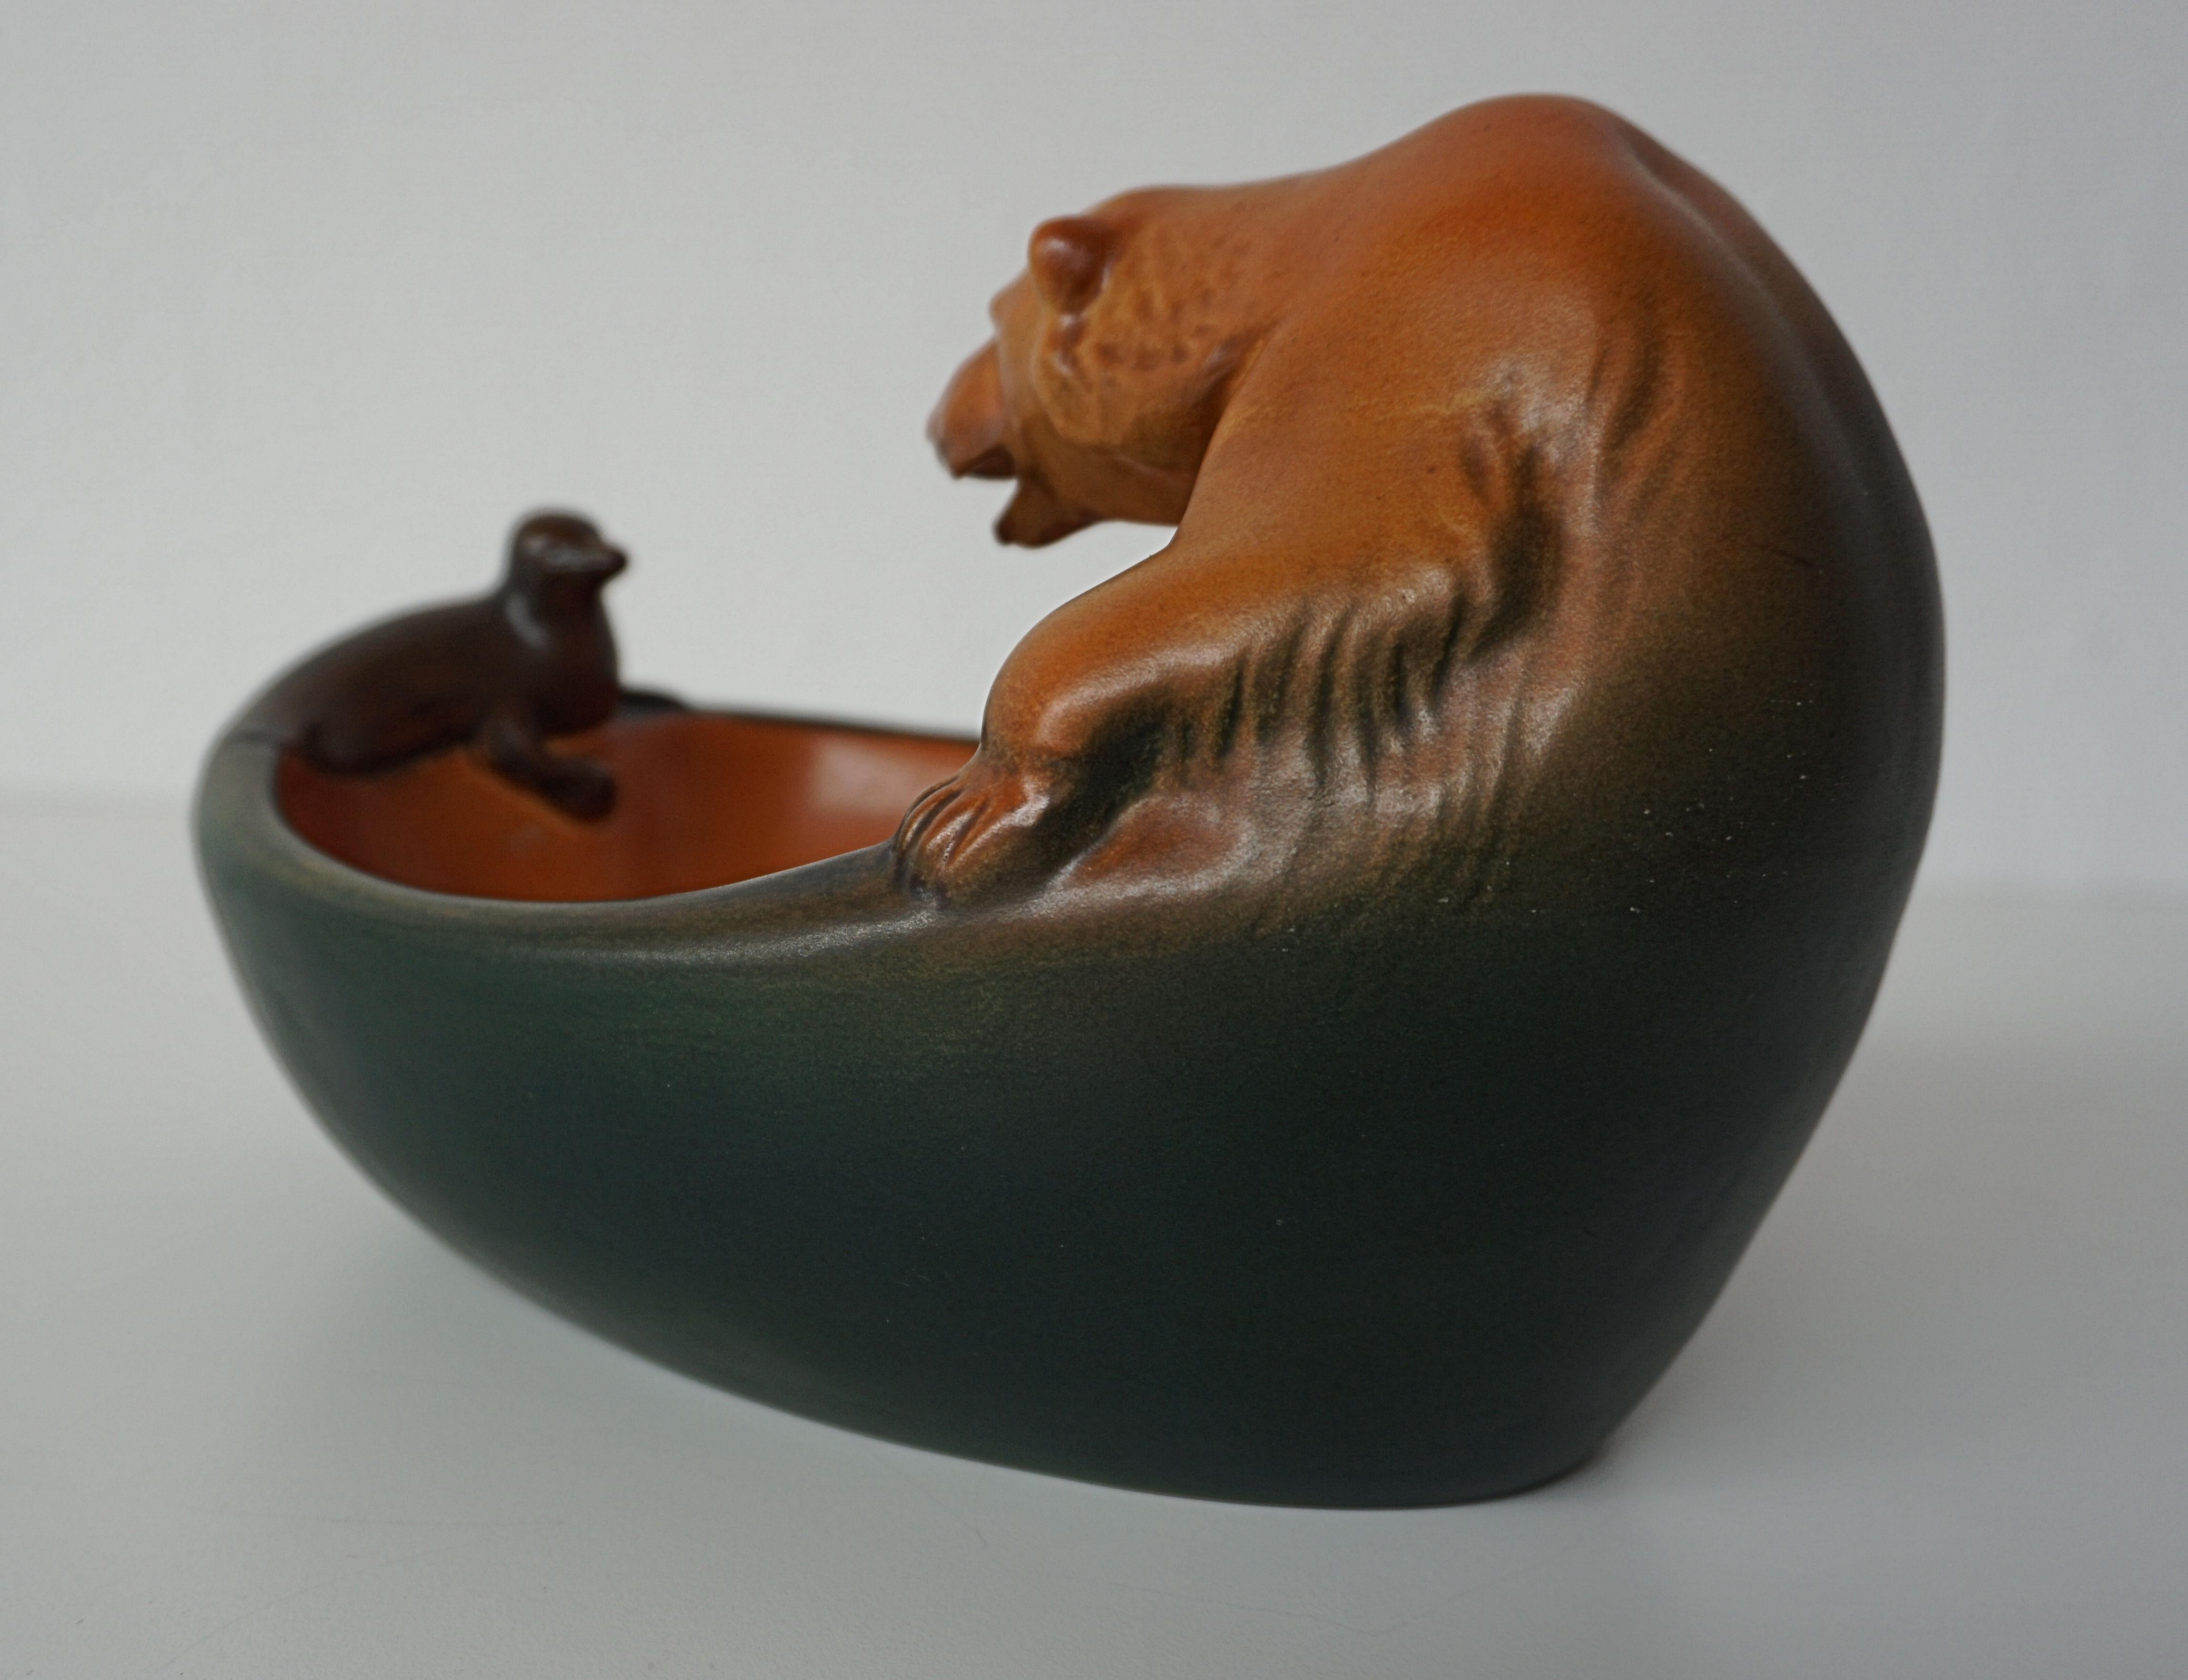 Danish Art Nouveau icebear and seal bowl designed by Charles Arvesen in 1909 for P. Ipsens Enke.

The handcrafted art nuveau bowl featureing a well made lively icebear looking at a small seal is in excellent condition.

Ipsens Enke (1843 - 1955)